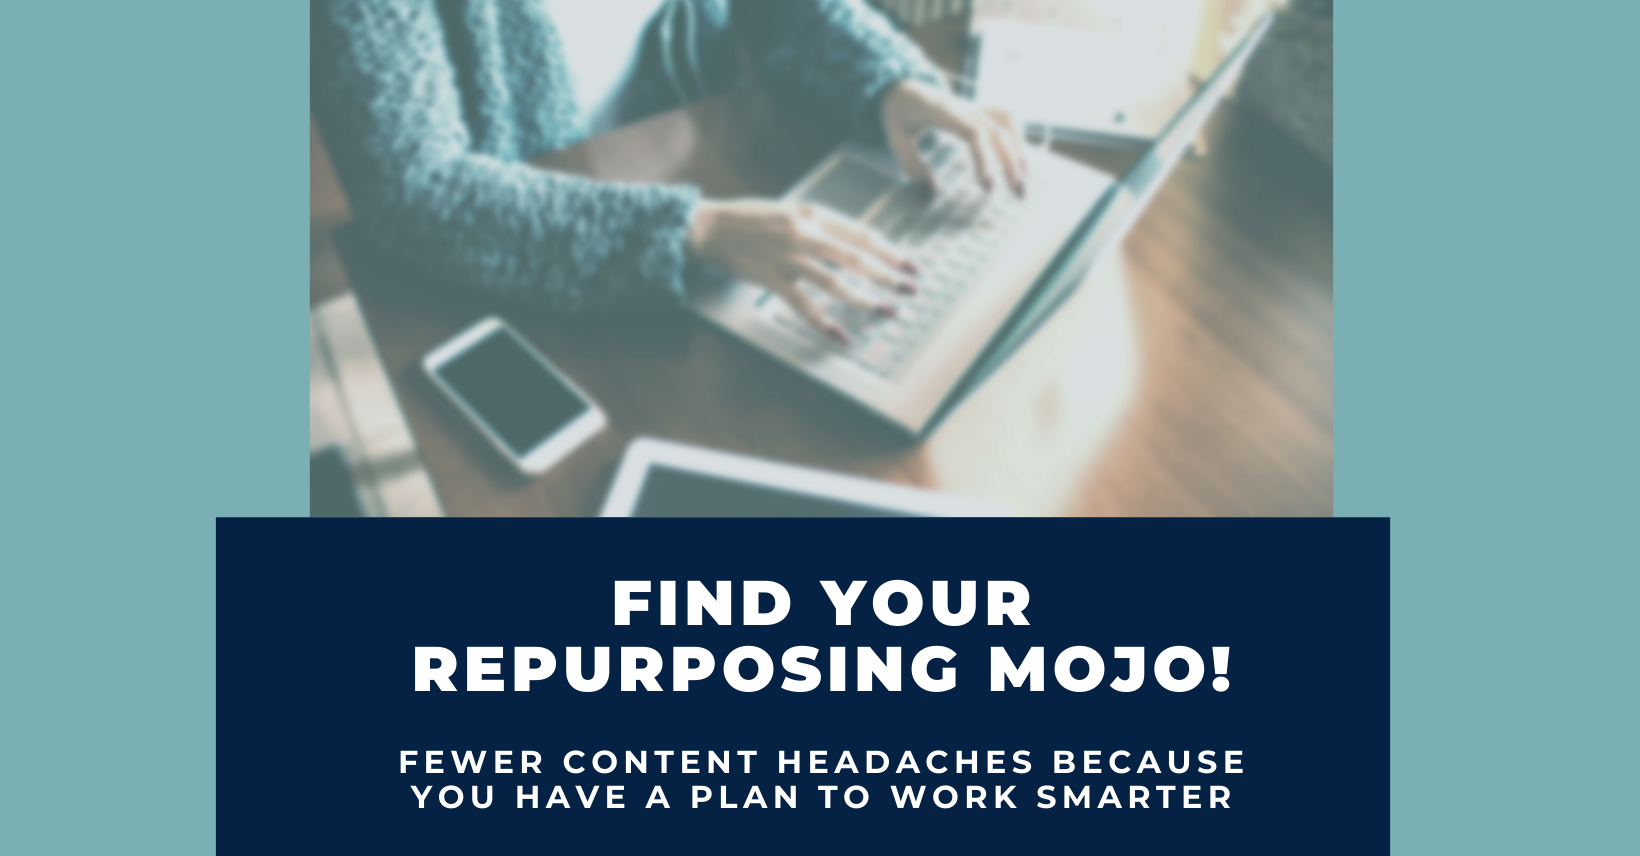 Smart Women Business Owner Finds Content Repurposing Mojo